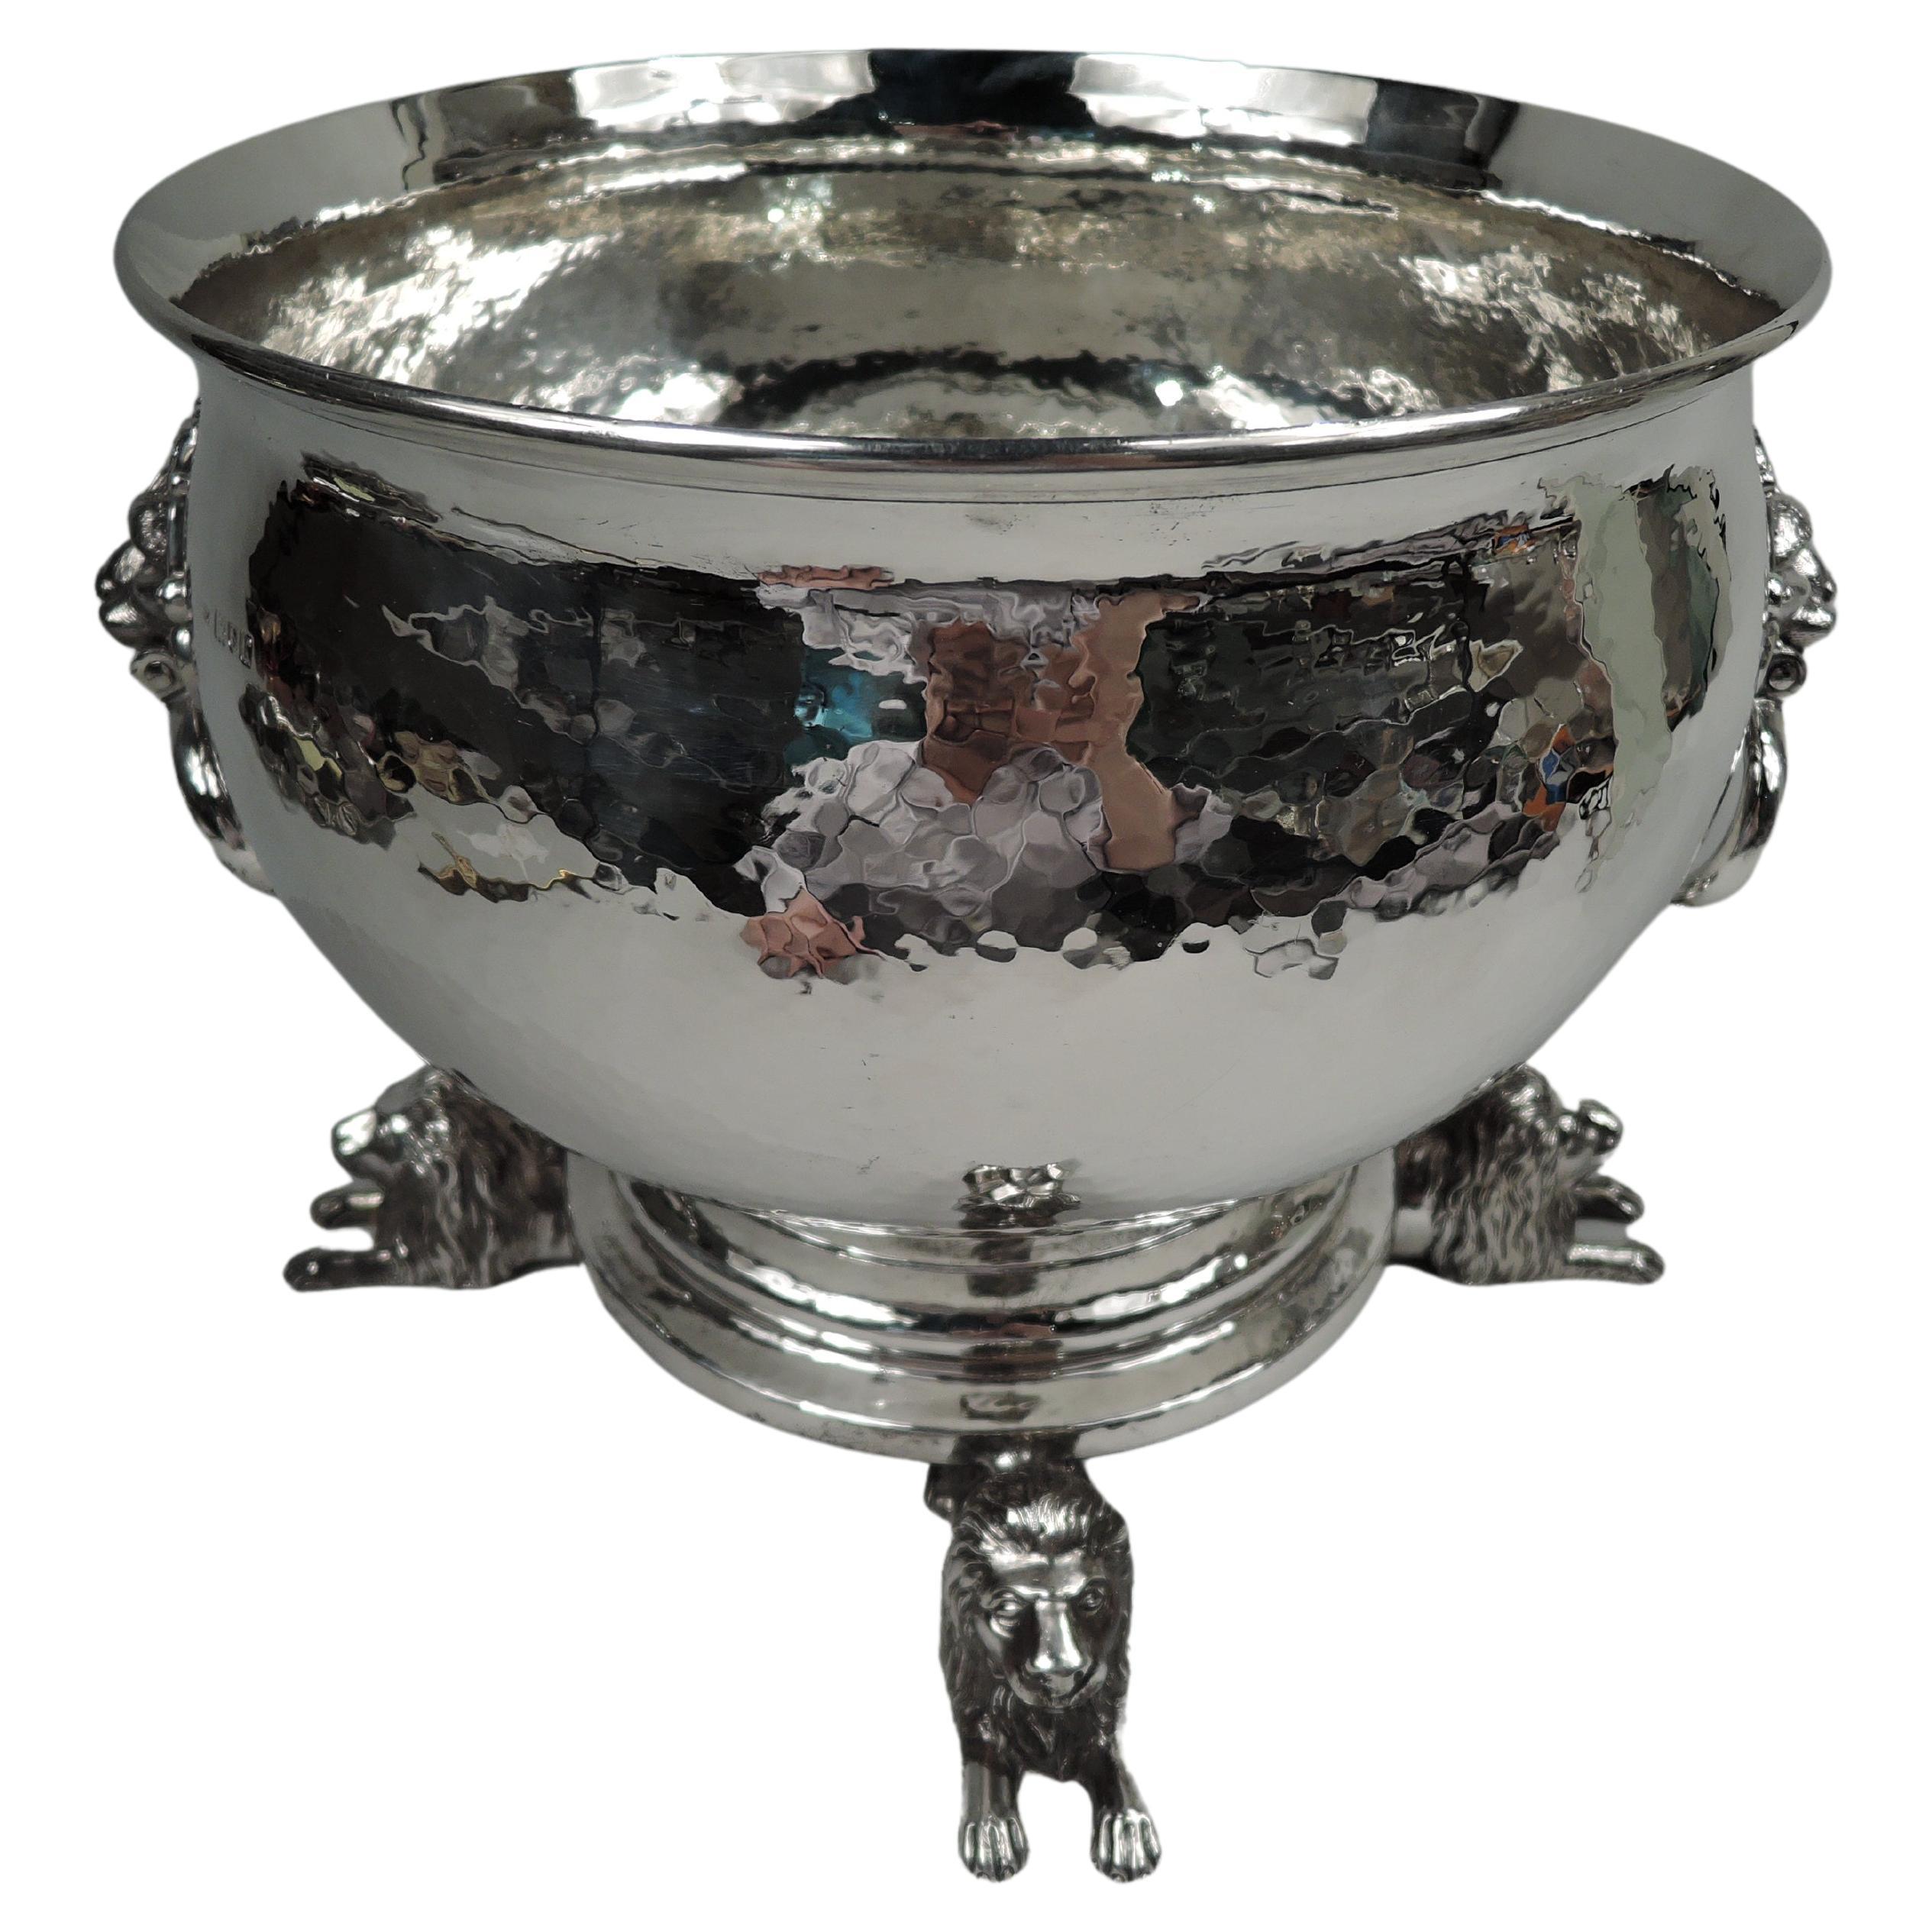 Crichton English Hand-Hammered Sterling Silver Centerpiece Bowl, 1912 For Sale